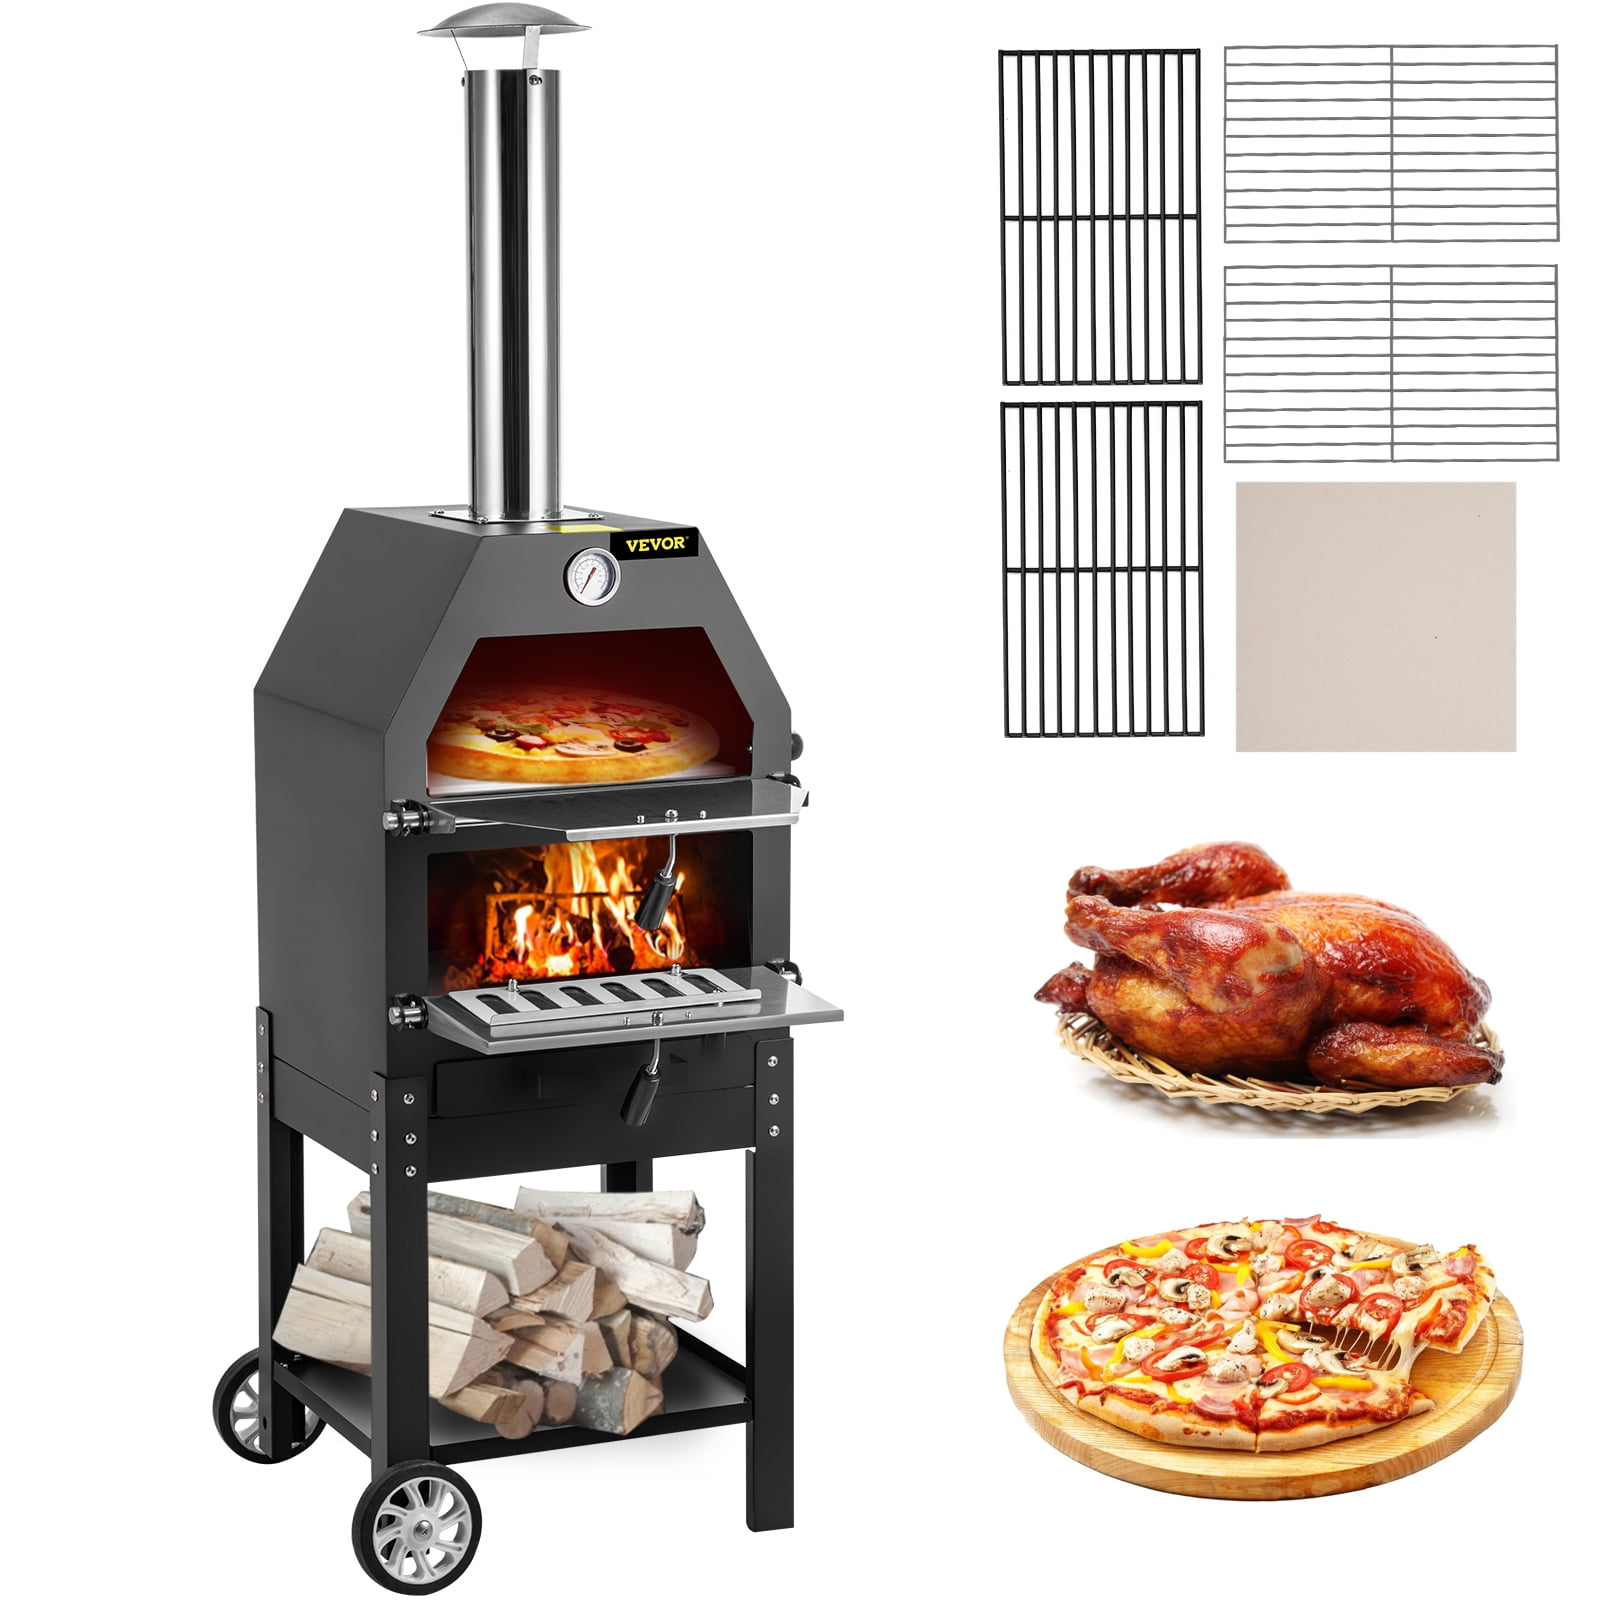 VEVOR Pizza Oven 12 in. Portable Multi-functional Charcoal Fired Outdoor Pizza Oven with Kit for Camping in Stainless Steel, Stainlesss Steel